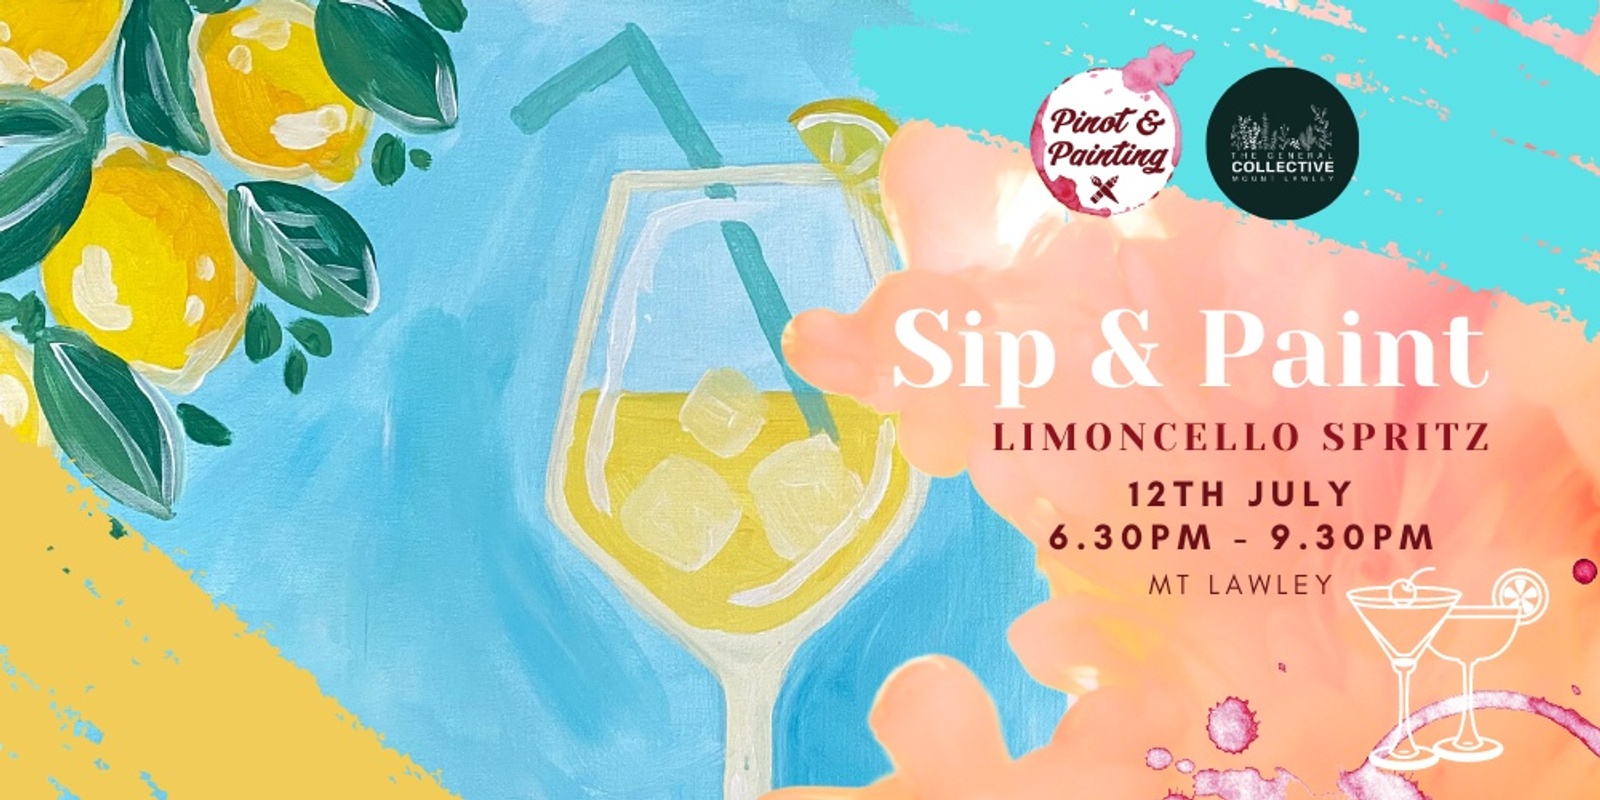 Banner image for Limoncello - Cocktail Night Sip & Paint @ The General Collective